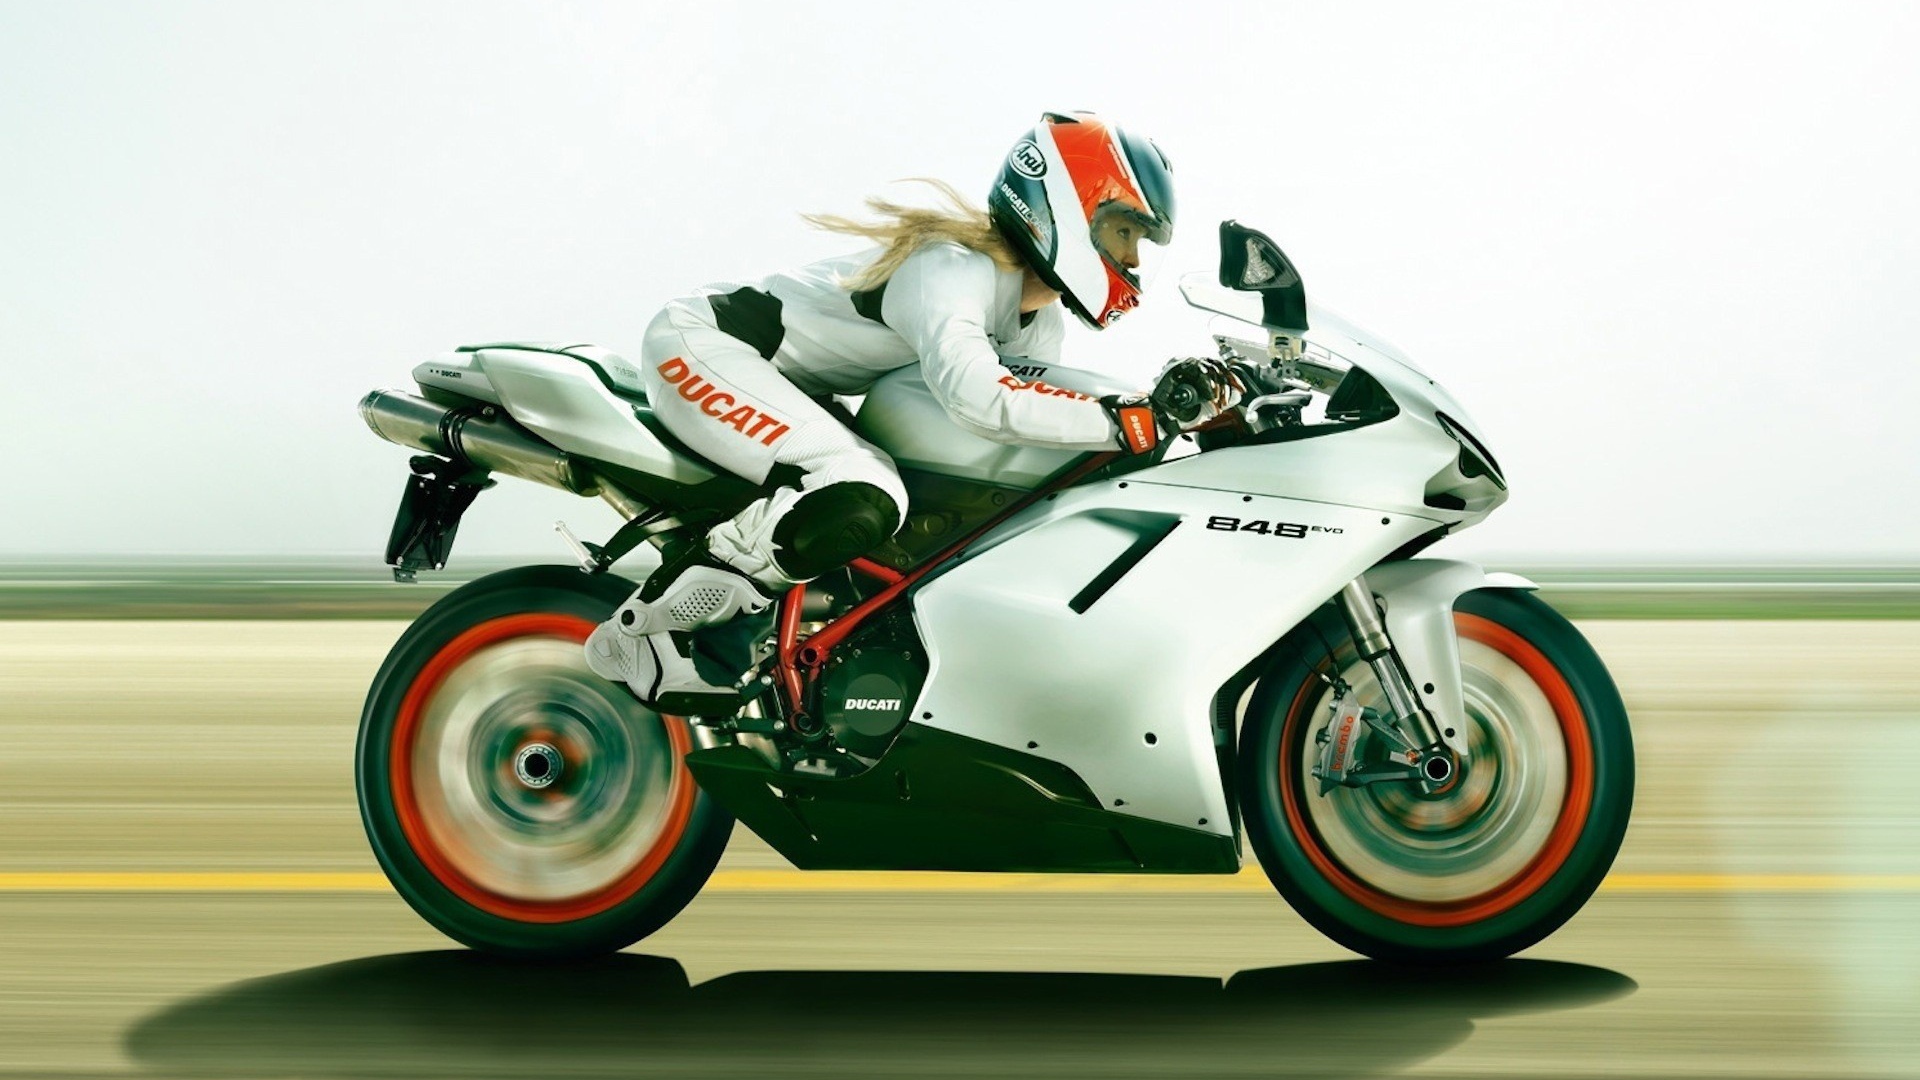 Blonde on a motorcycle Ducati